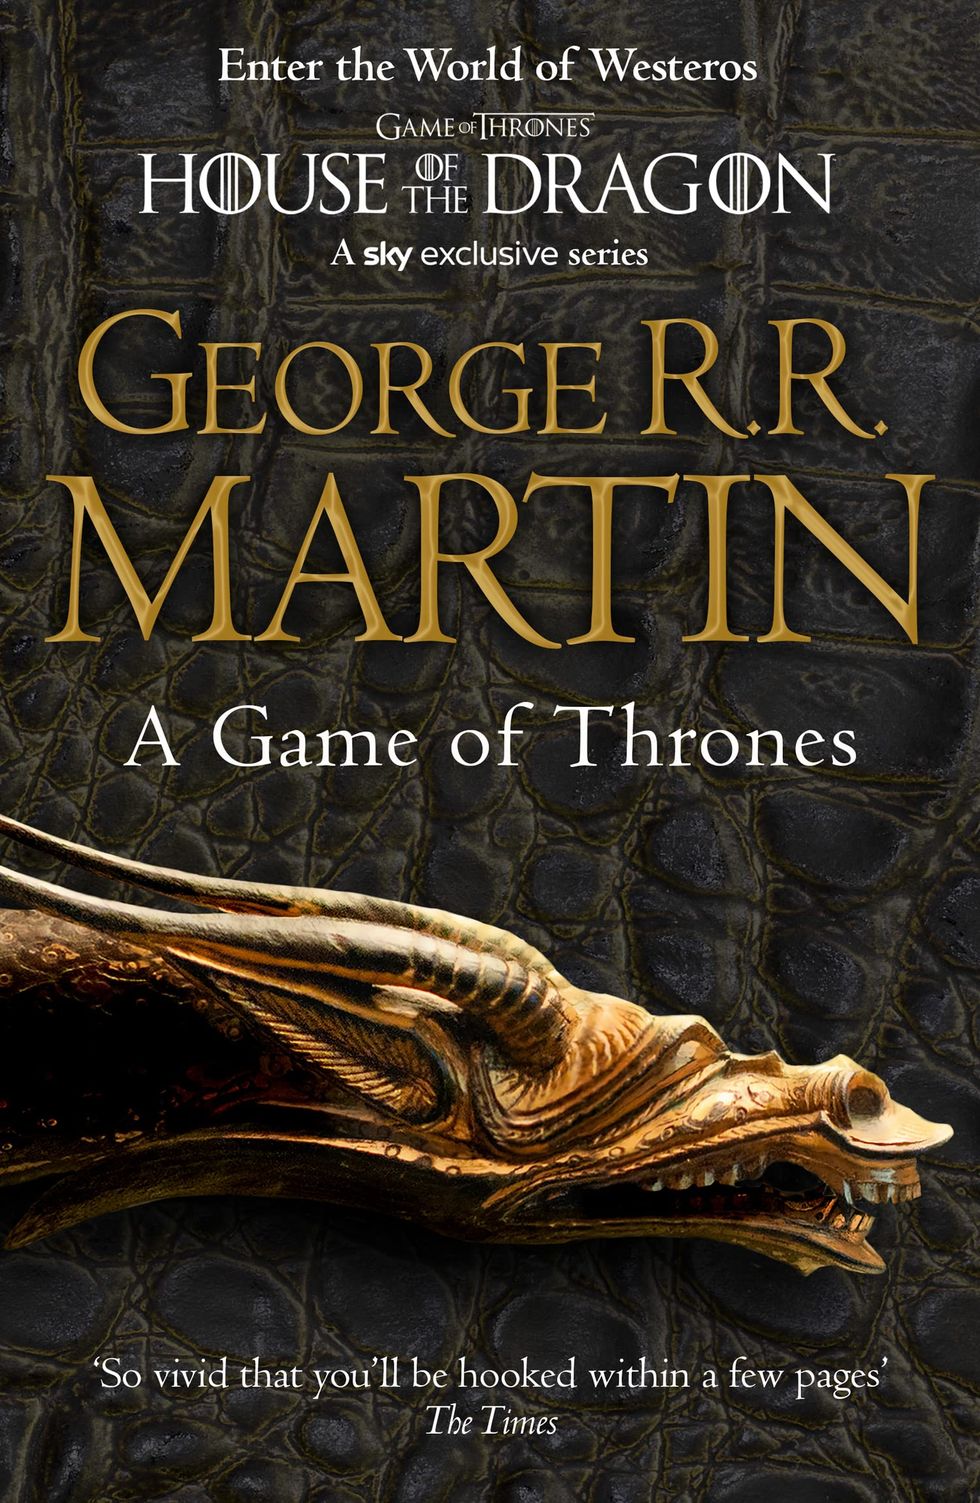 3. A Game of Thrones